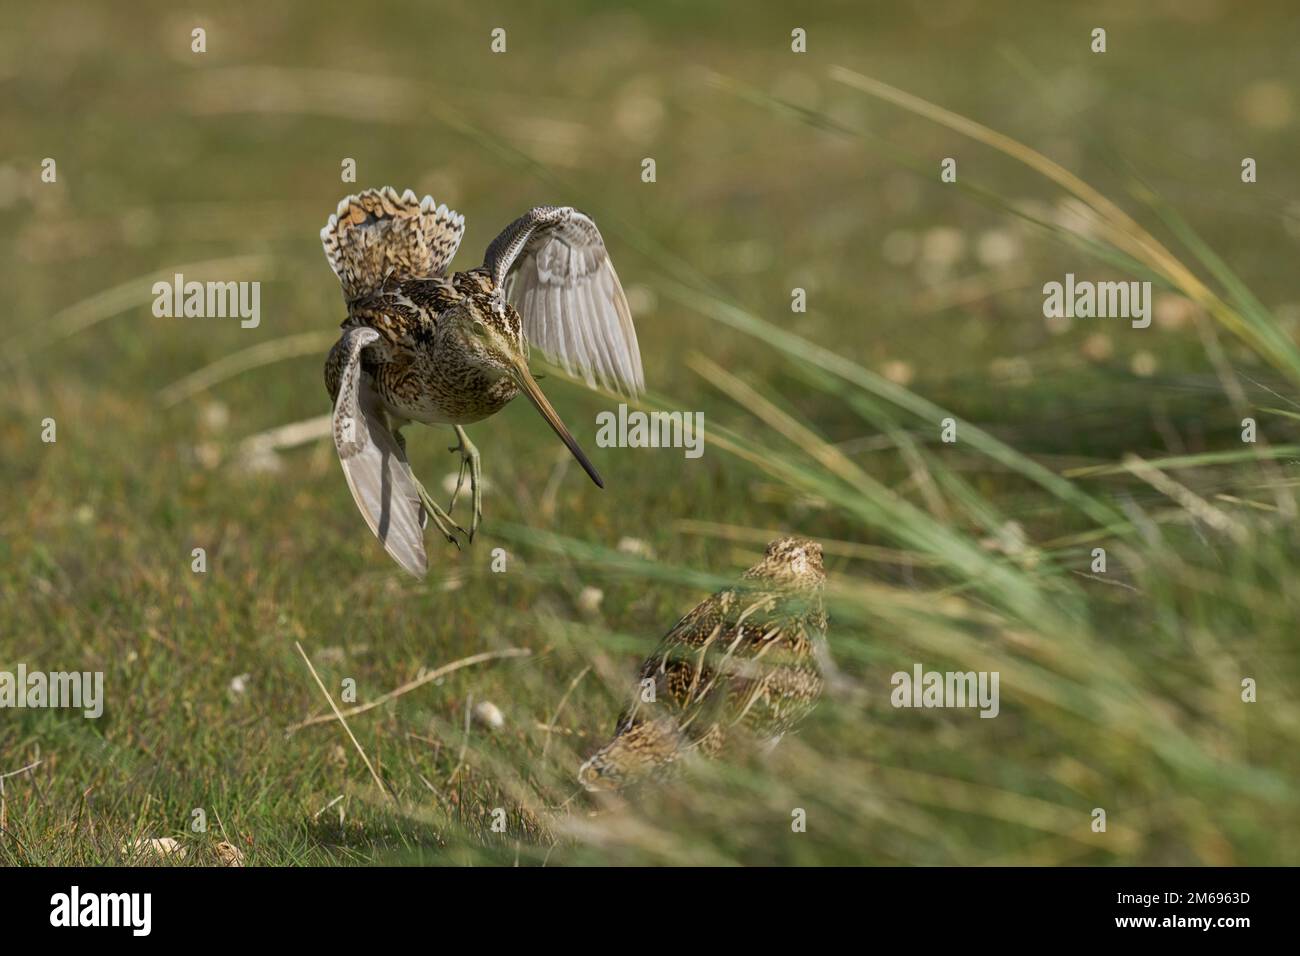 Magellanic Snipe (Gallinago paraguaiae magellanica) interacting during the spring breeding season on Carcass Island in the Falkland Islands. Stock Photo